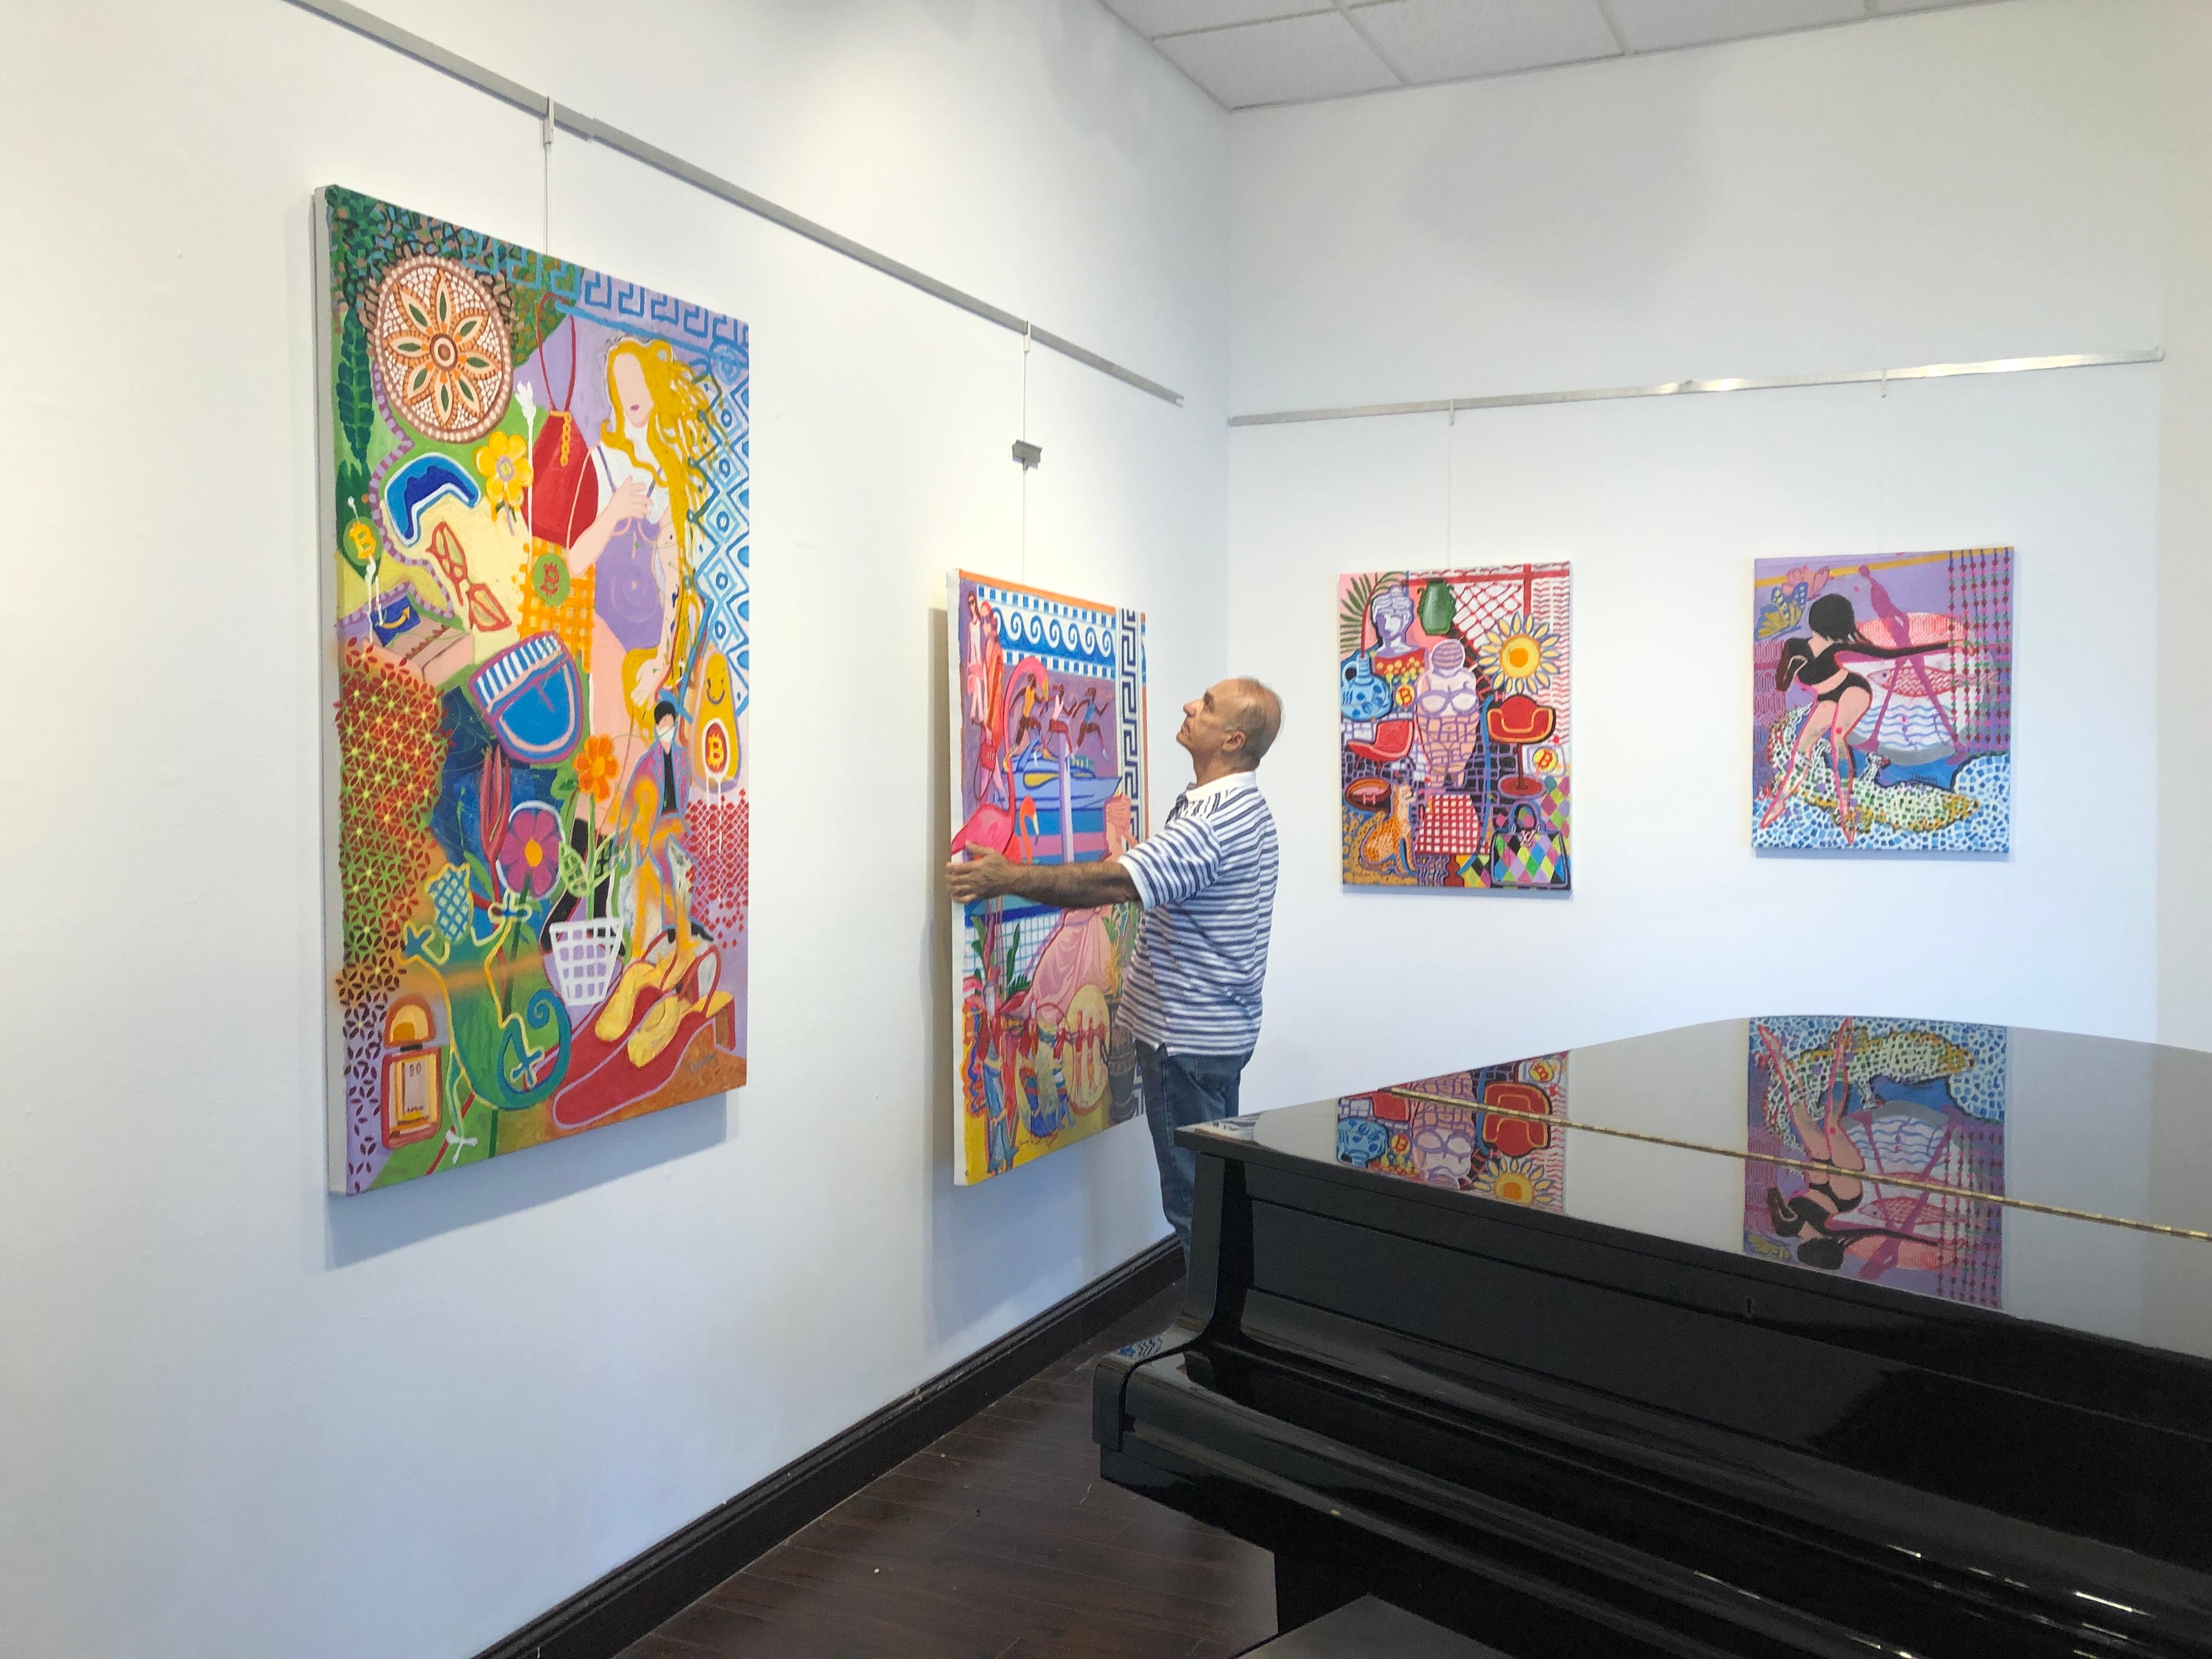 The past and present of “Living the Dream” make the case for the way art and its language of color, line, and shape enrich a viewer’s experience of the work and offer a delicate balance between representation and abstraction, mirroring the real and